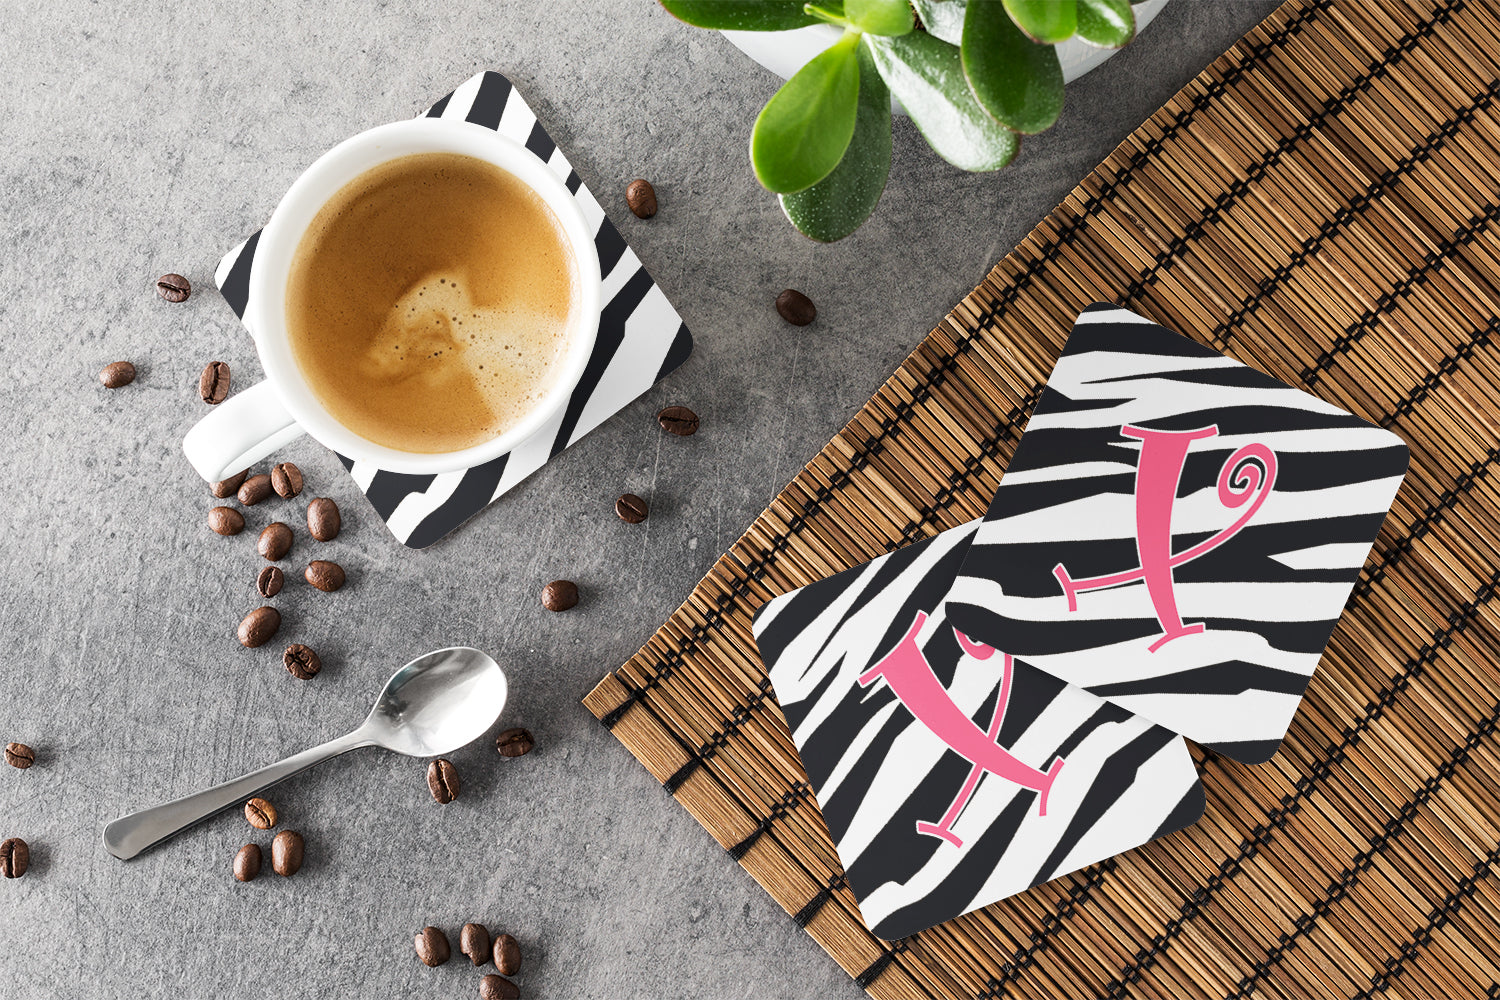 Set of 4 Monogram - Zebra Stripe and Pink Foam Coasters Initial Letter X - the-store.com